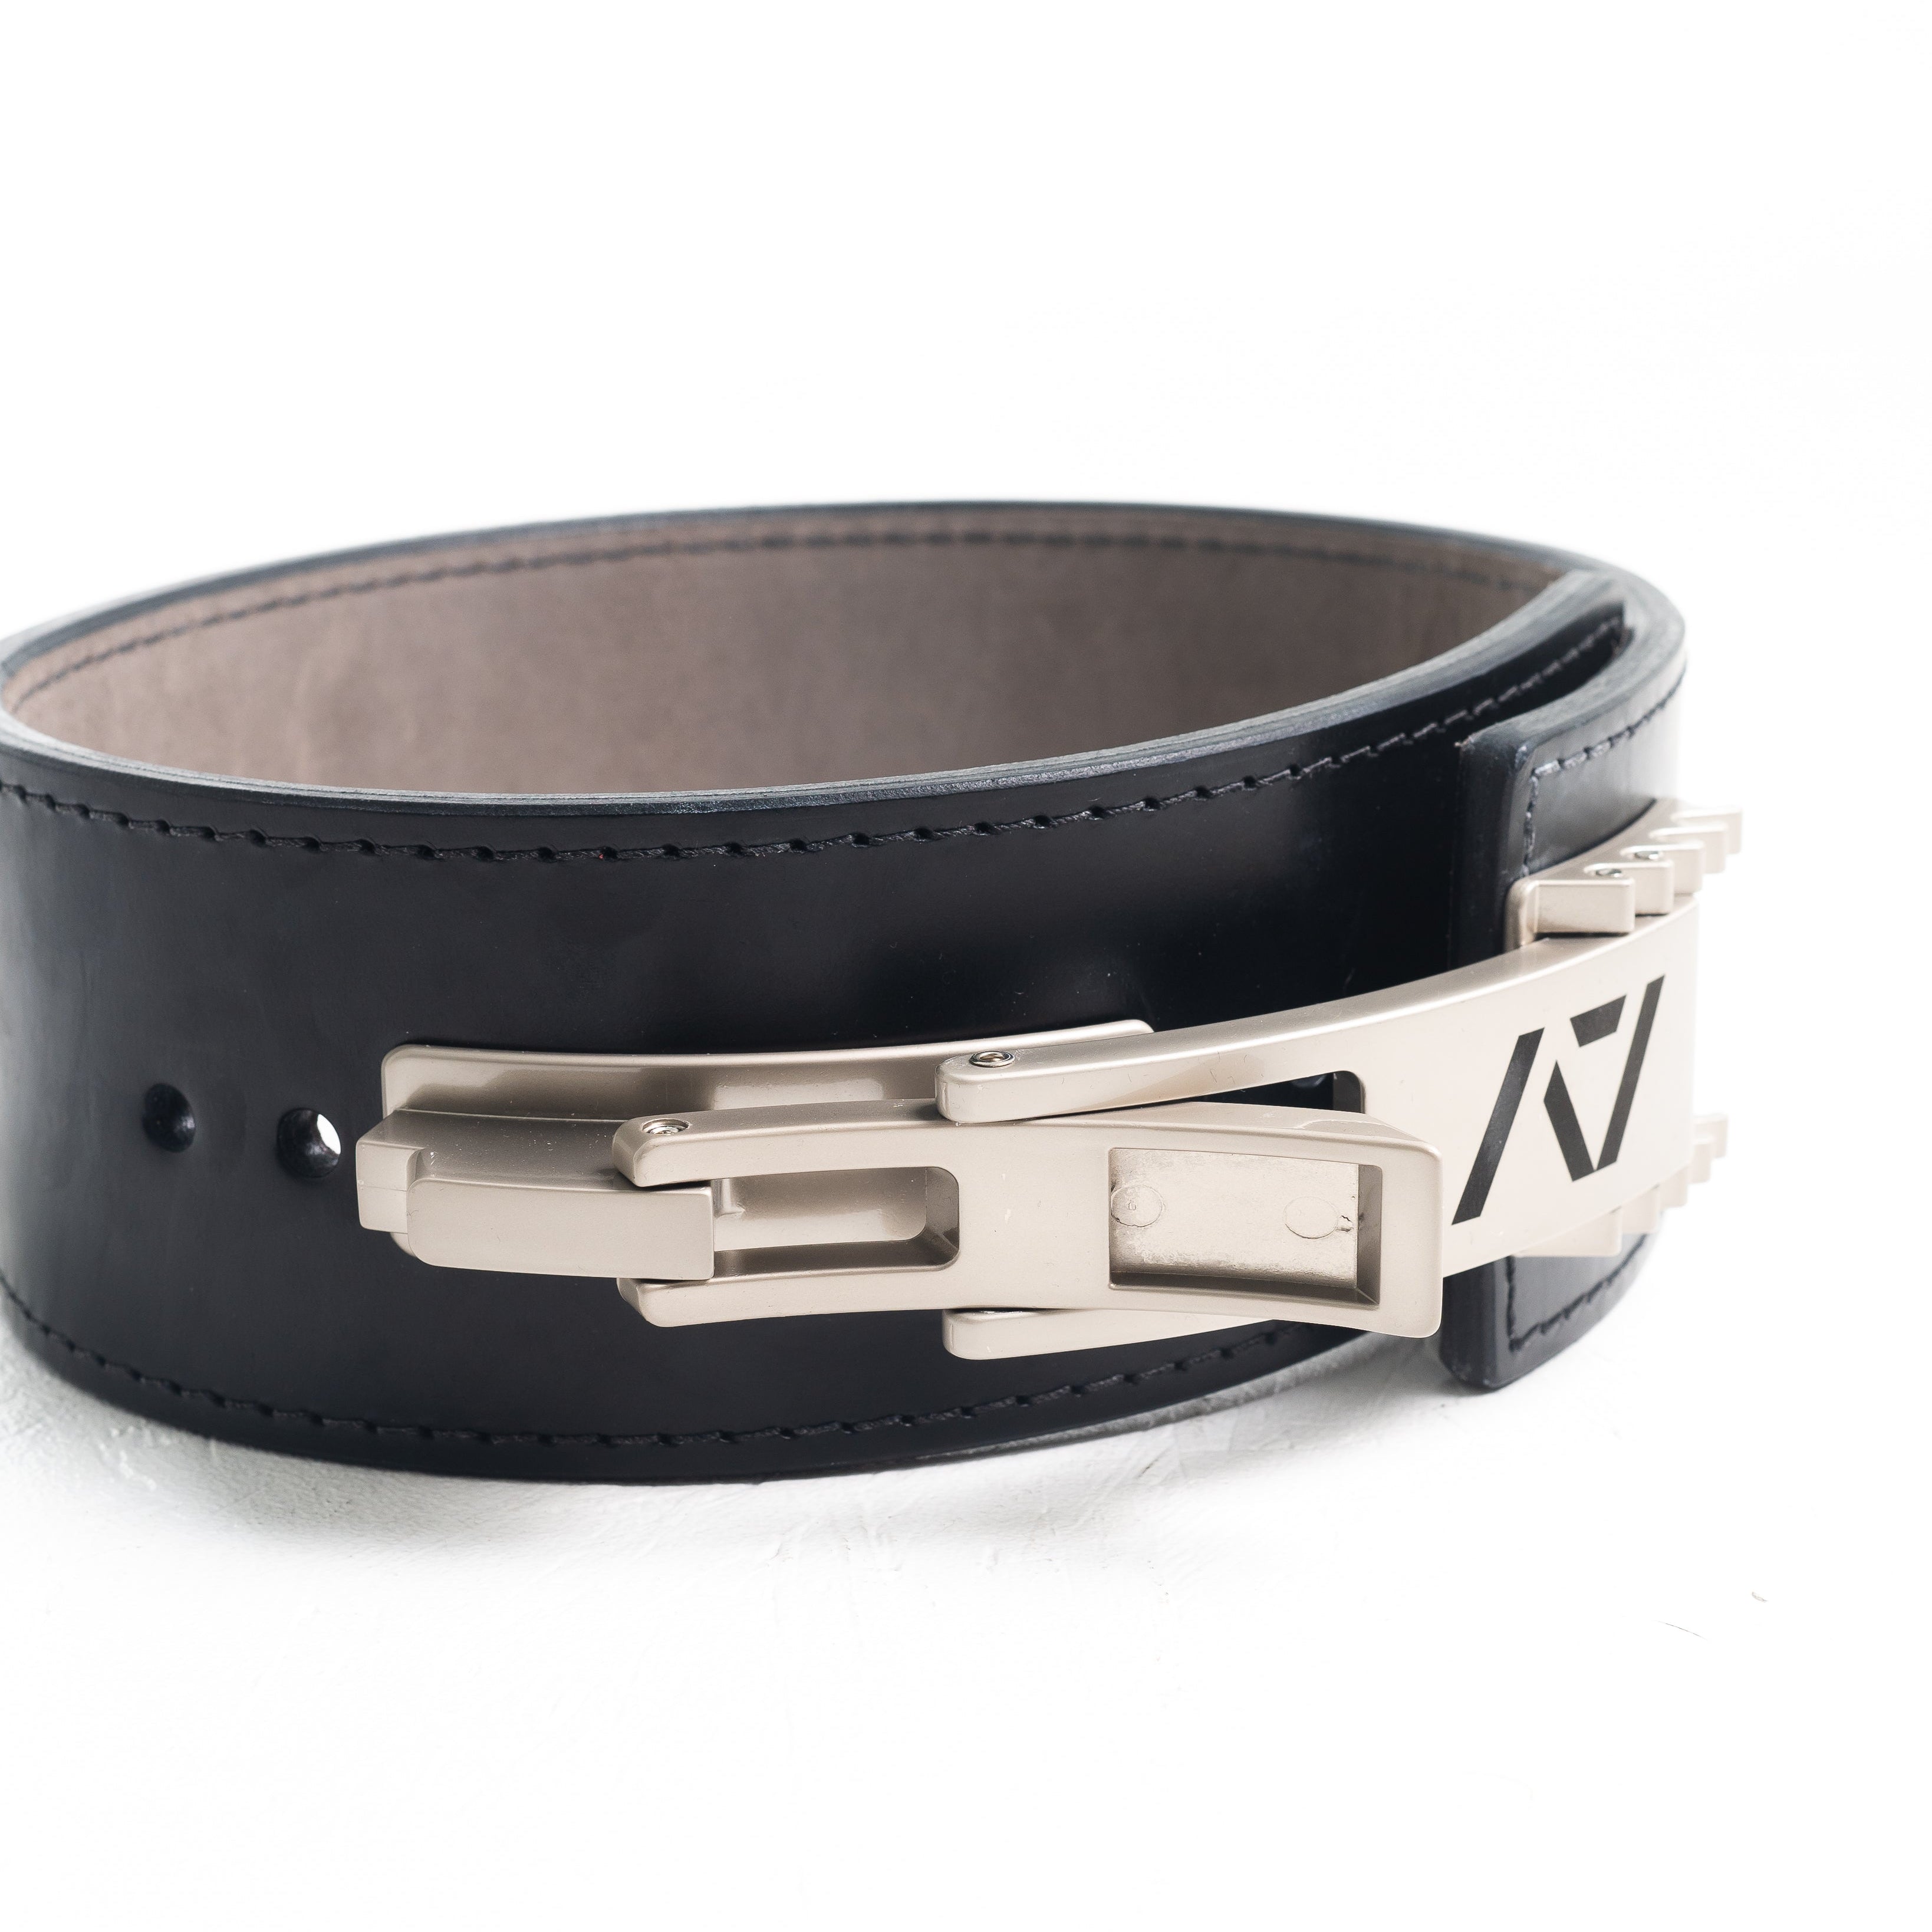 A7 IPF Approved Lever Belt features a black design with black leather, silver engraved buckle and debossed A7 logo on the leather. The new Pioneer Adjustable Lever, PAL, buckle allows you to quickly adjust the tightness of your belt for a perfect fit. The IPF Approved Kit includes Singlet, A7 Meet Shirt, A7 Zebra Wrist Wraps, A7 Deadlift Socks, Hourglass Knee Sleeves (Stiff Knee Sleeves and Rigor Mortis Knee Sleeves). Genouillères powerlifting shipping to France, Spain, Ireland, Germany, Italy and EU.